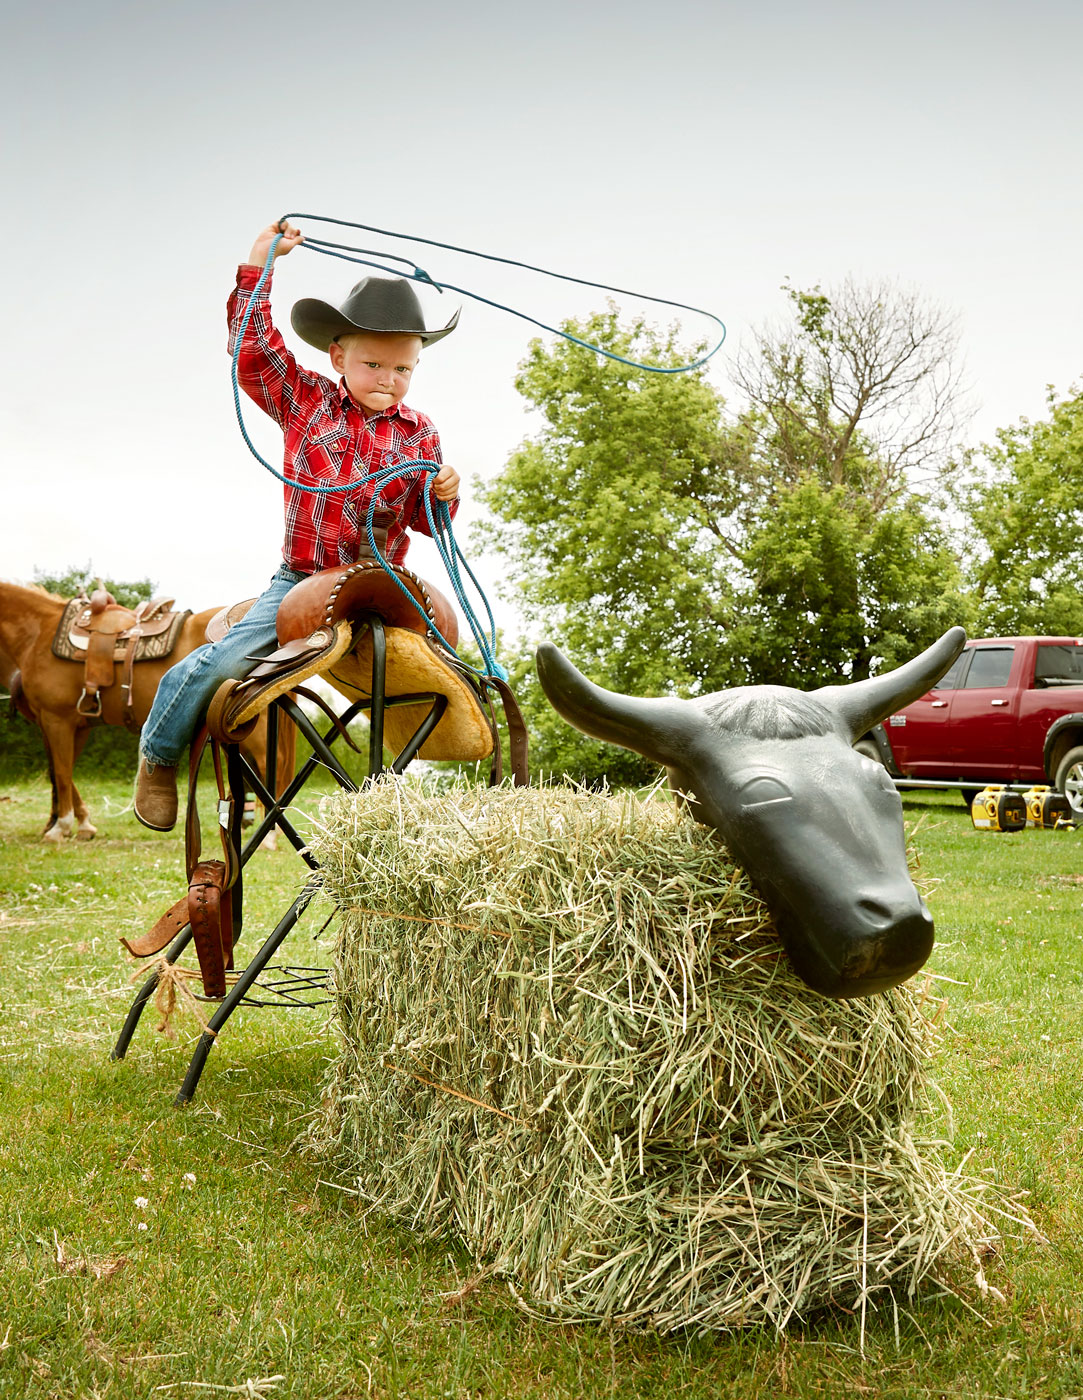 Boy practicing roping at rodeo | Childrens photography by Saverio Truglia